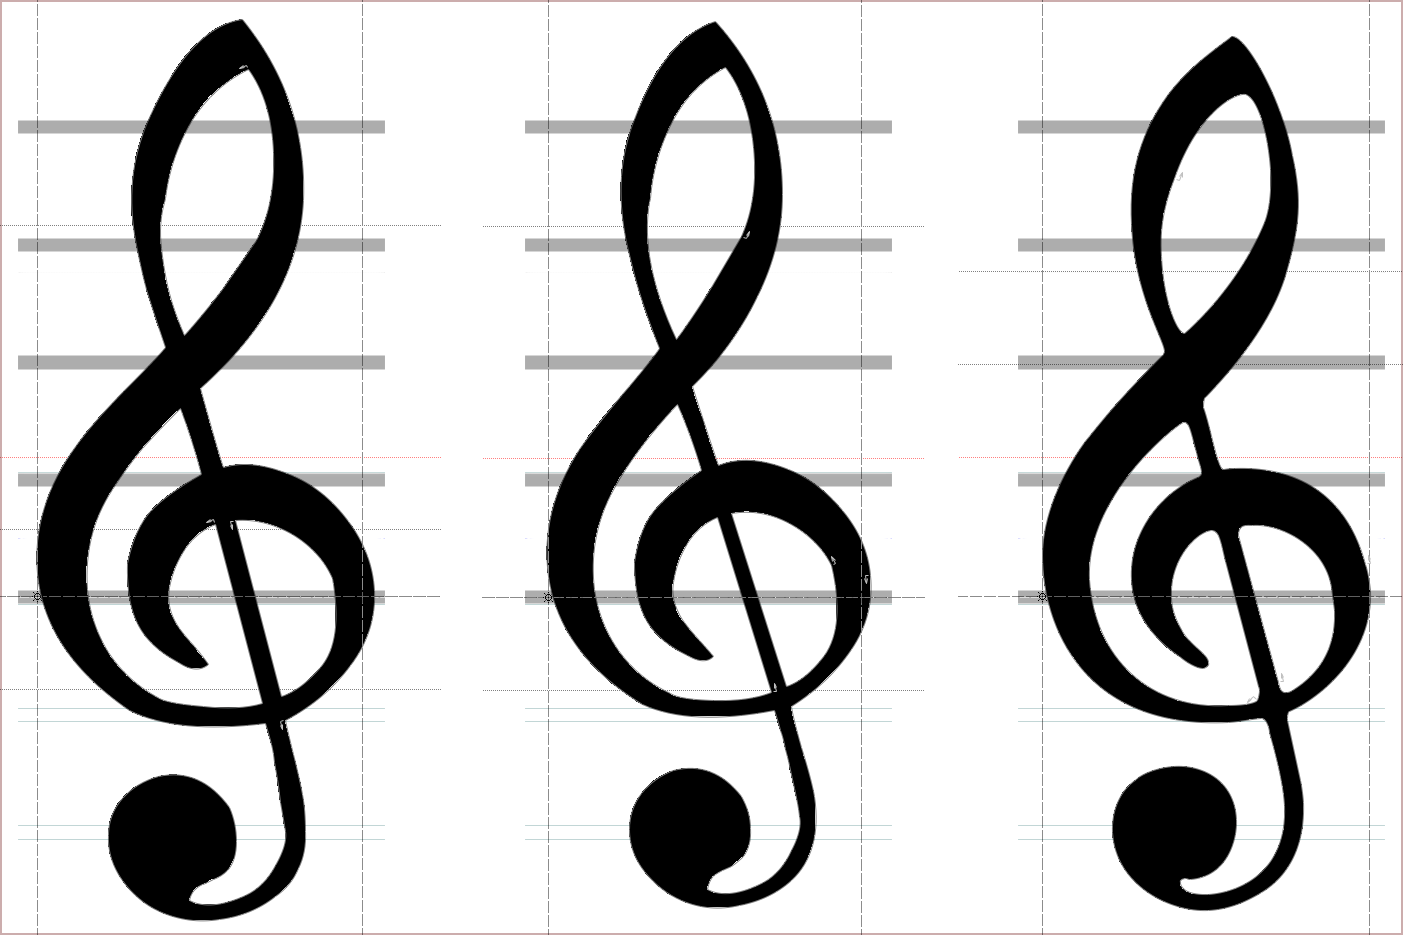 G-Clefs 1998 2001 2015.png